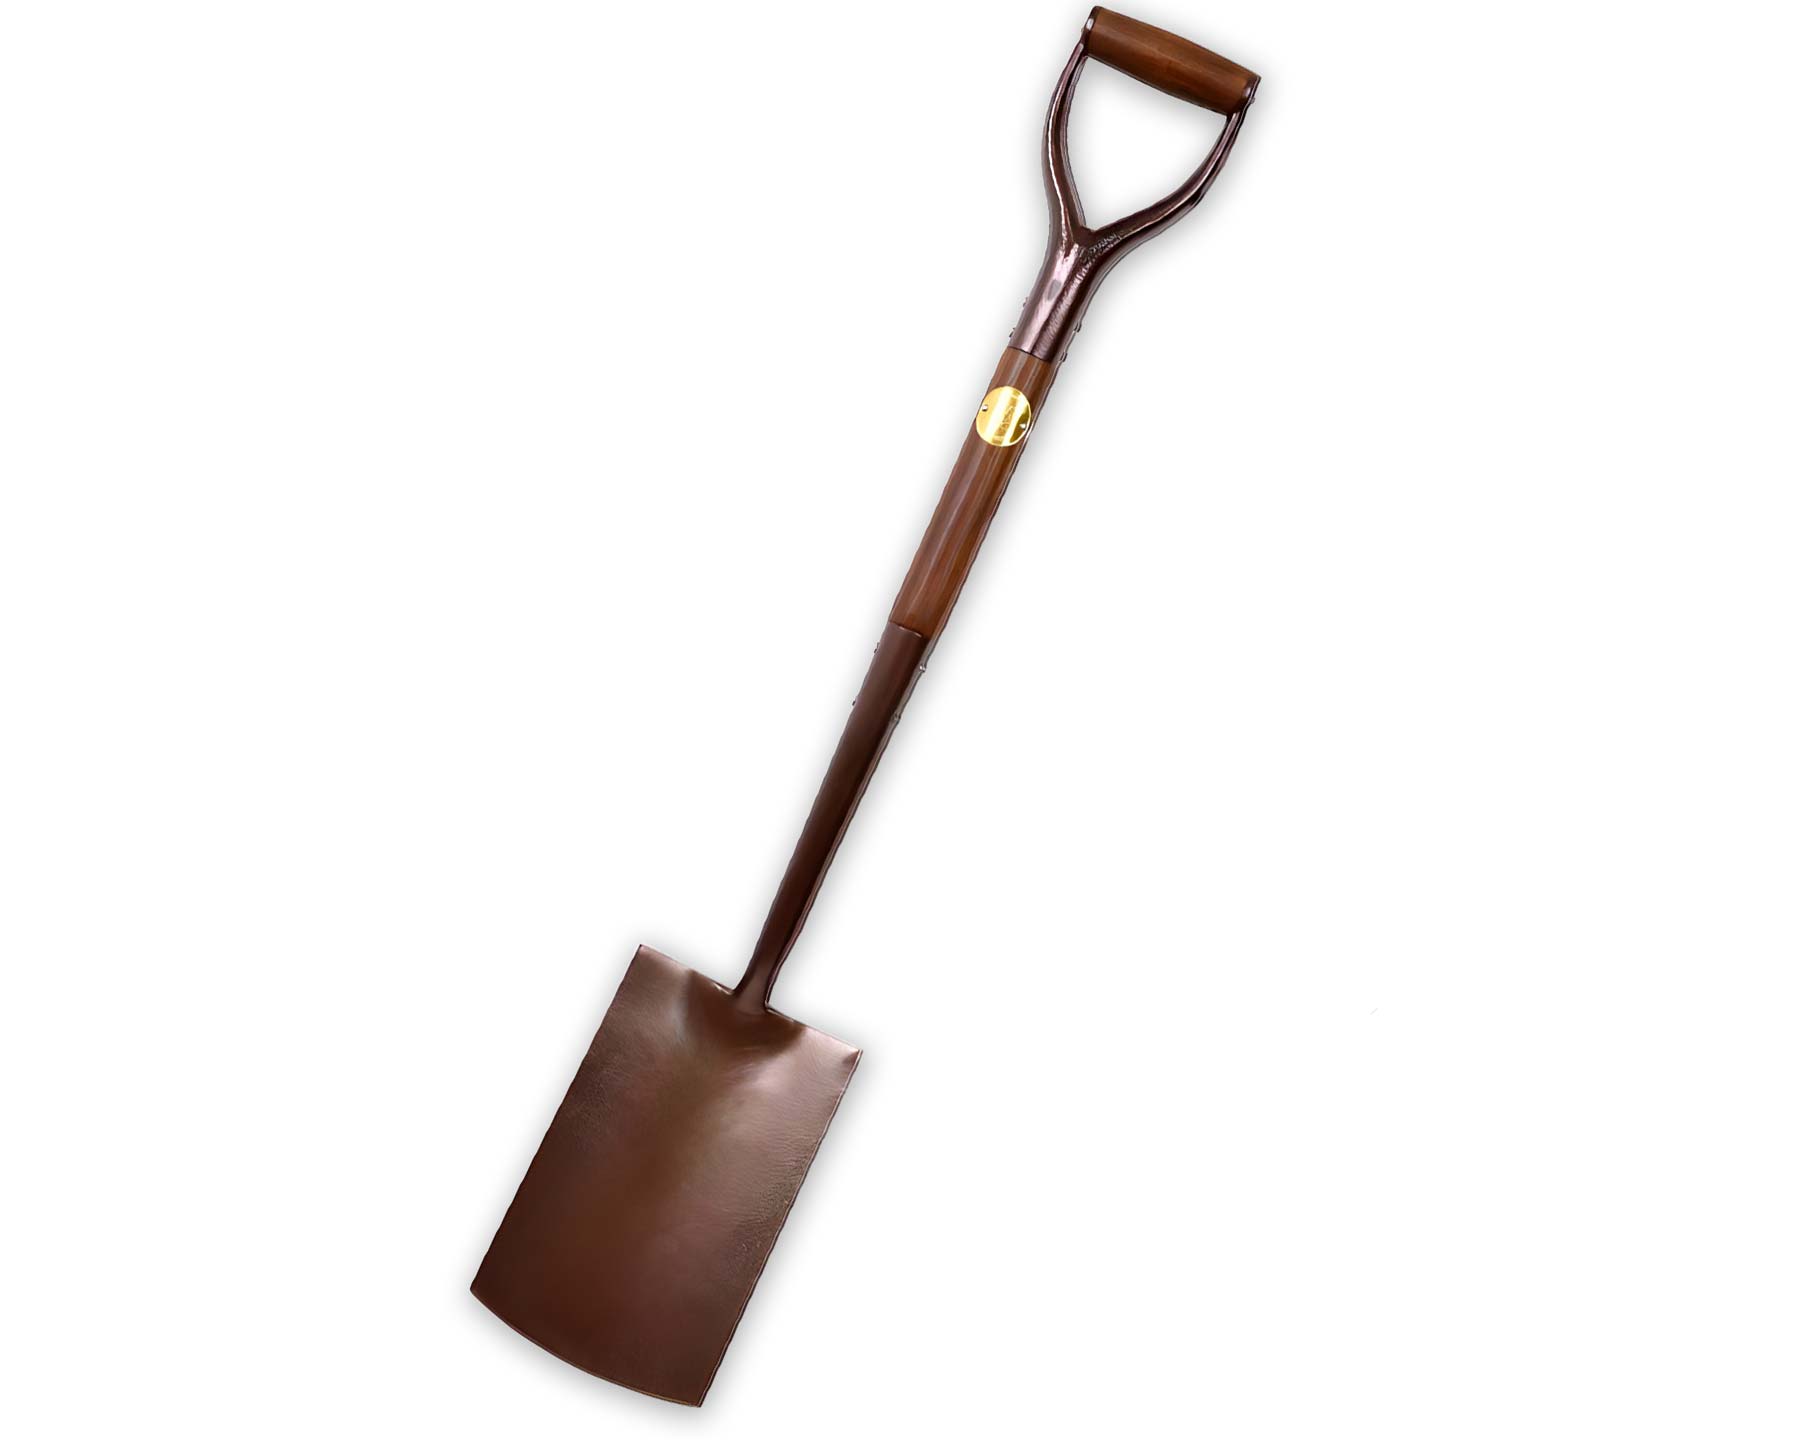 Garden Spade - part of the new National Trust range of garden tools by Burgon and Ball